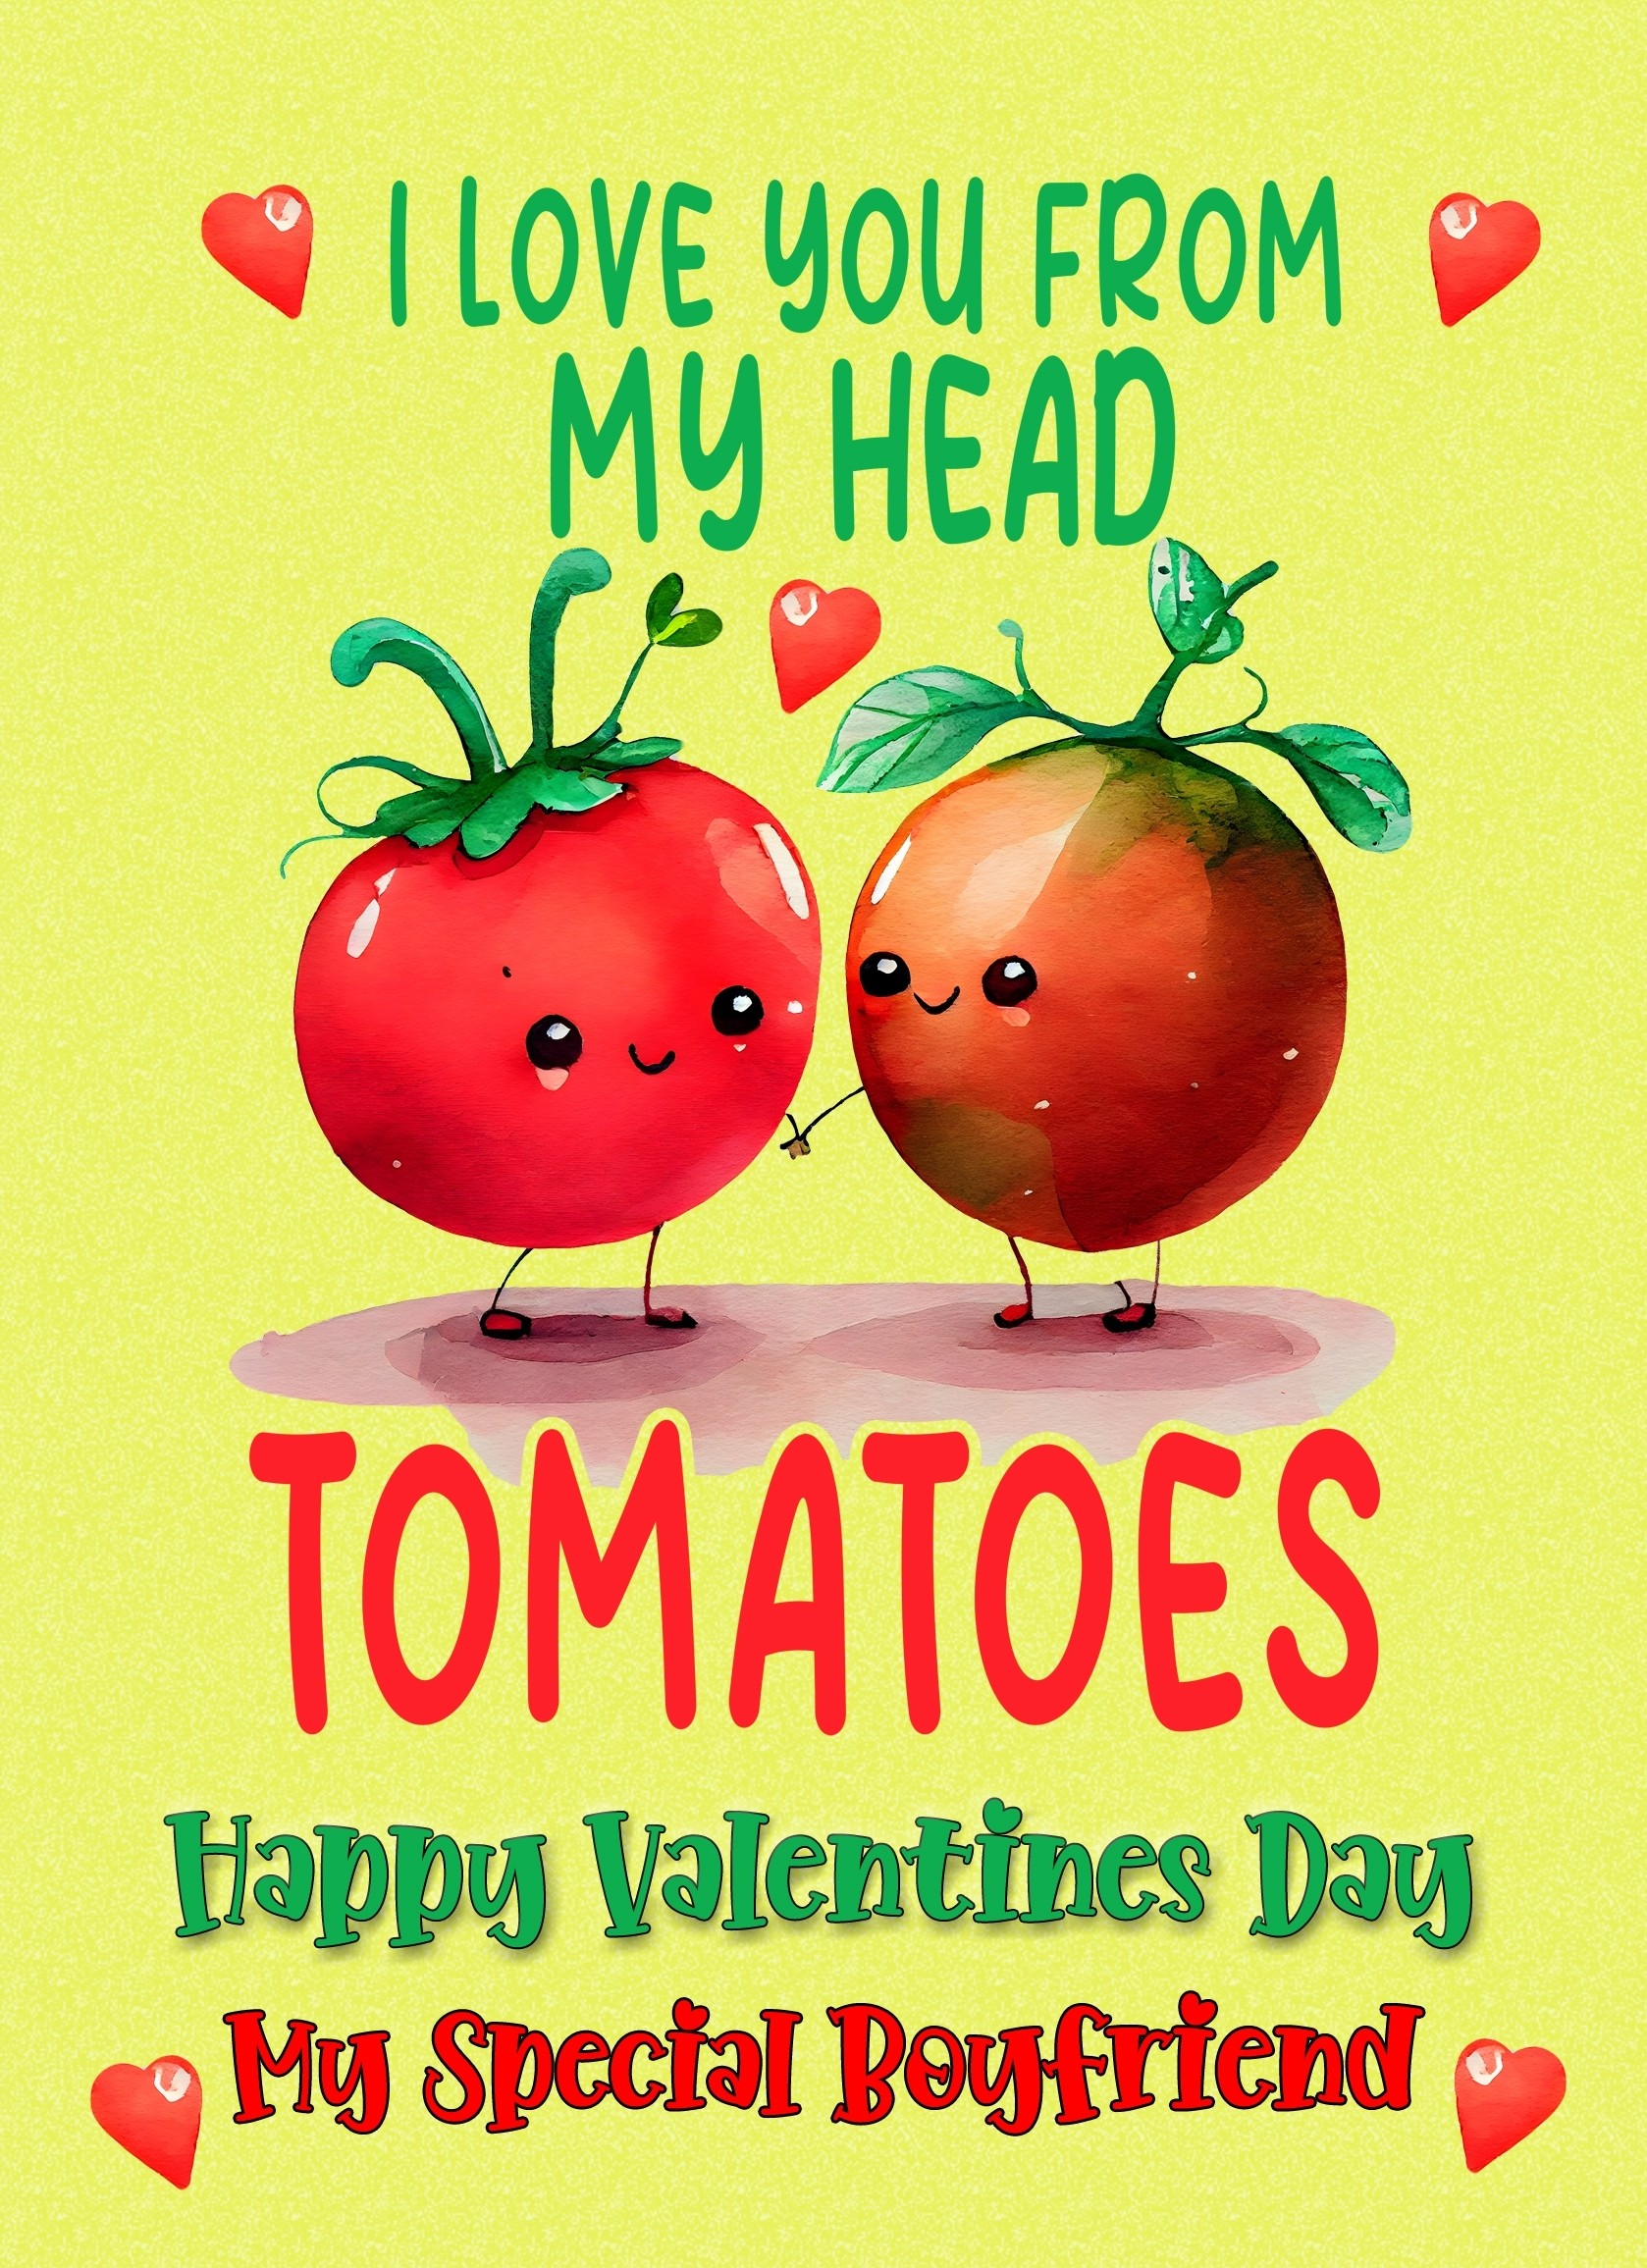 Funny Pun Valentines Day Card for Boyfriend (Tomatoes)